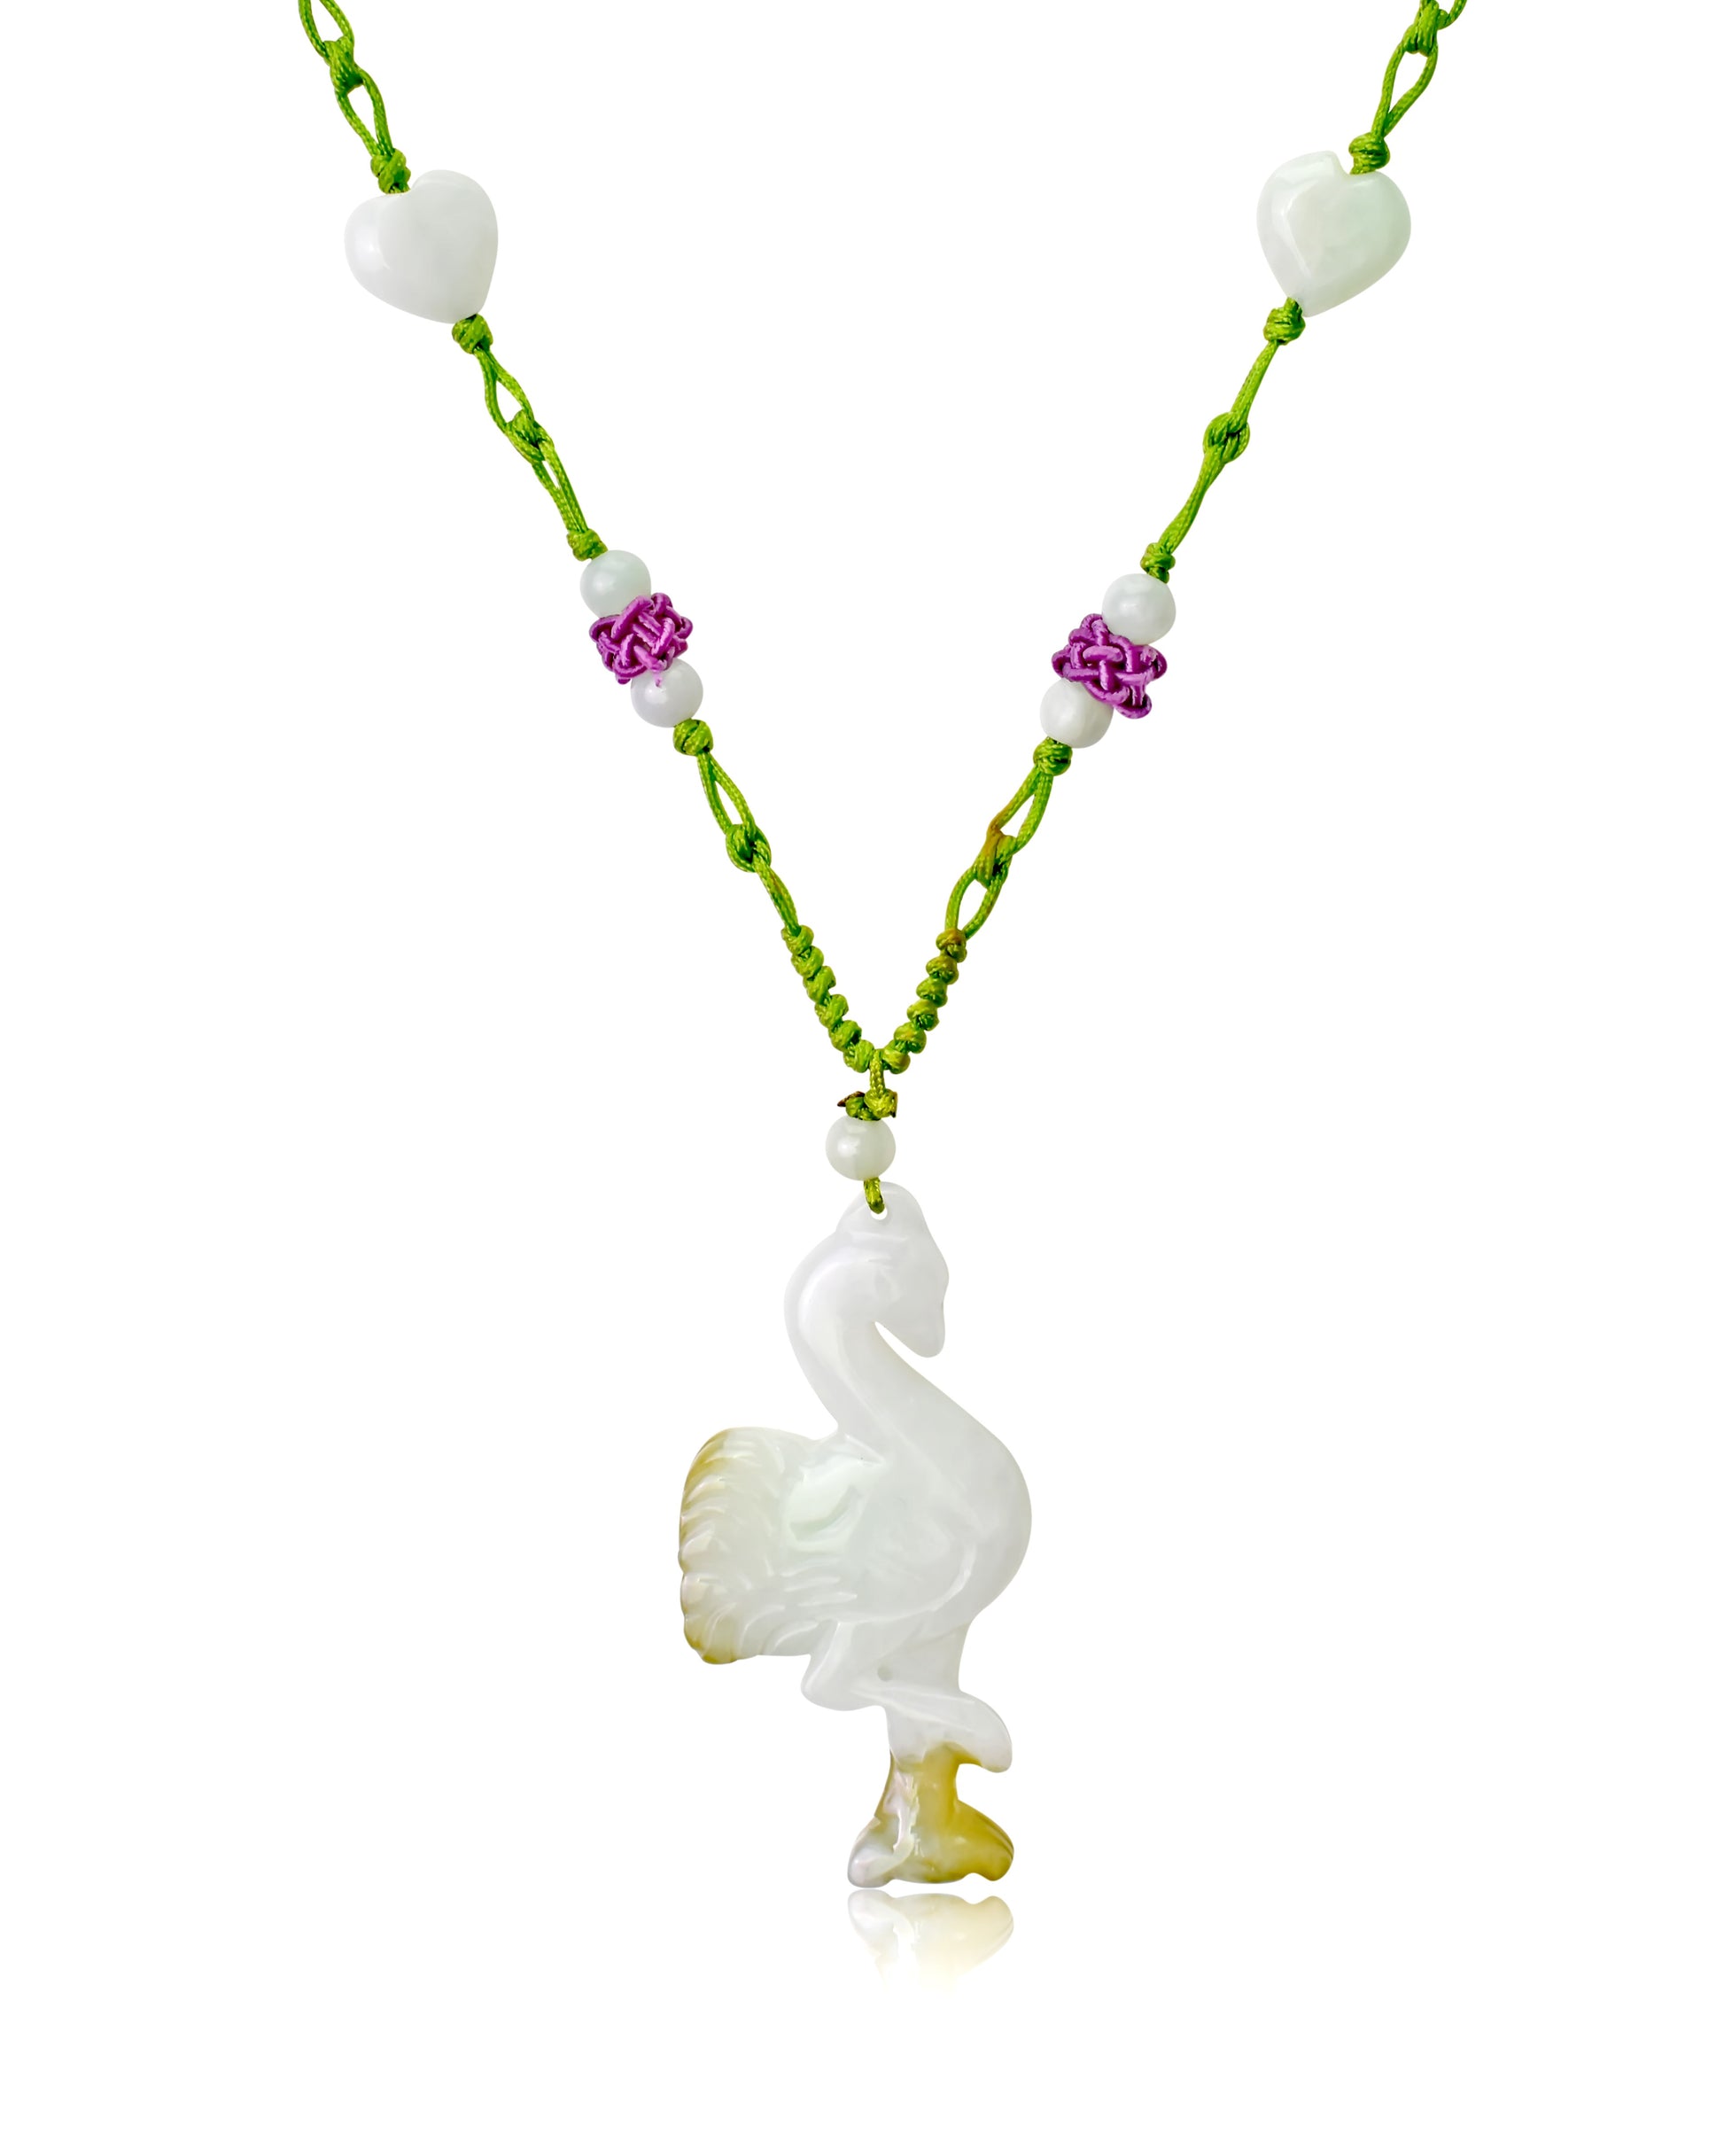 Add a Tropical Flair to Your Wardrobe with the Flamingo Jade Necklace made with Lime Cord